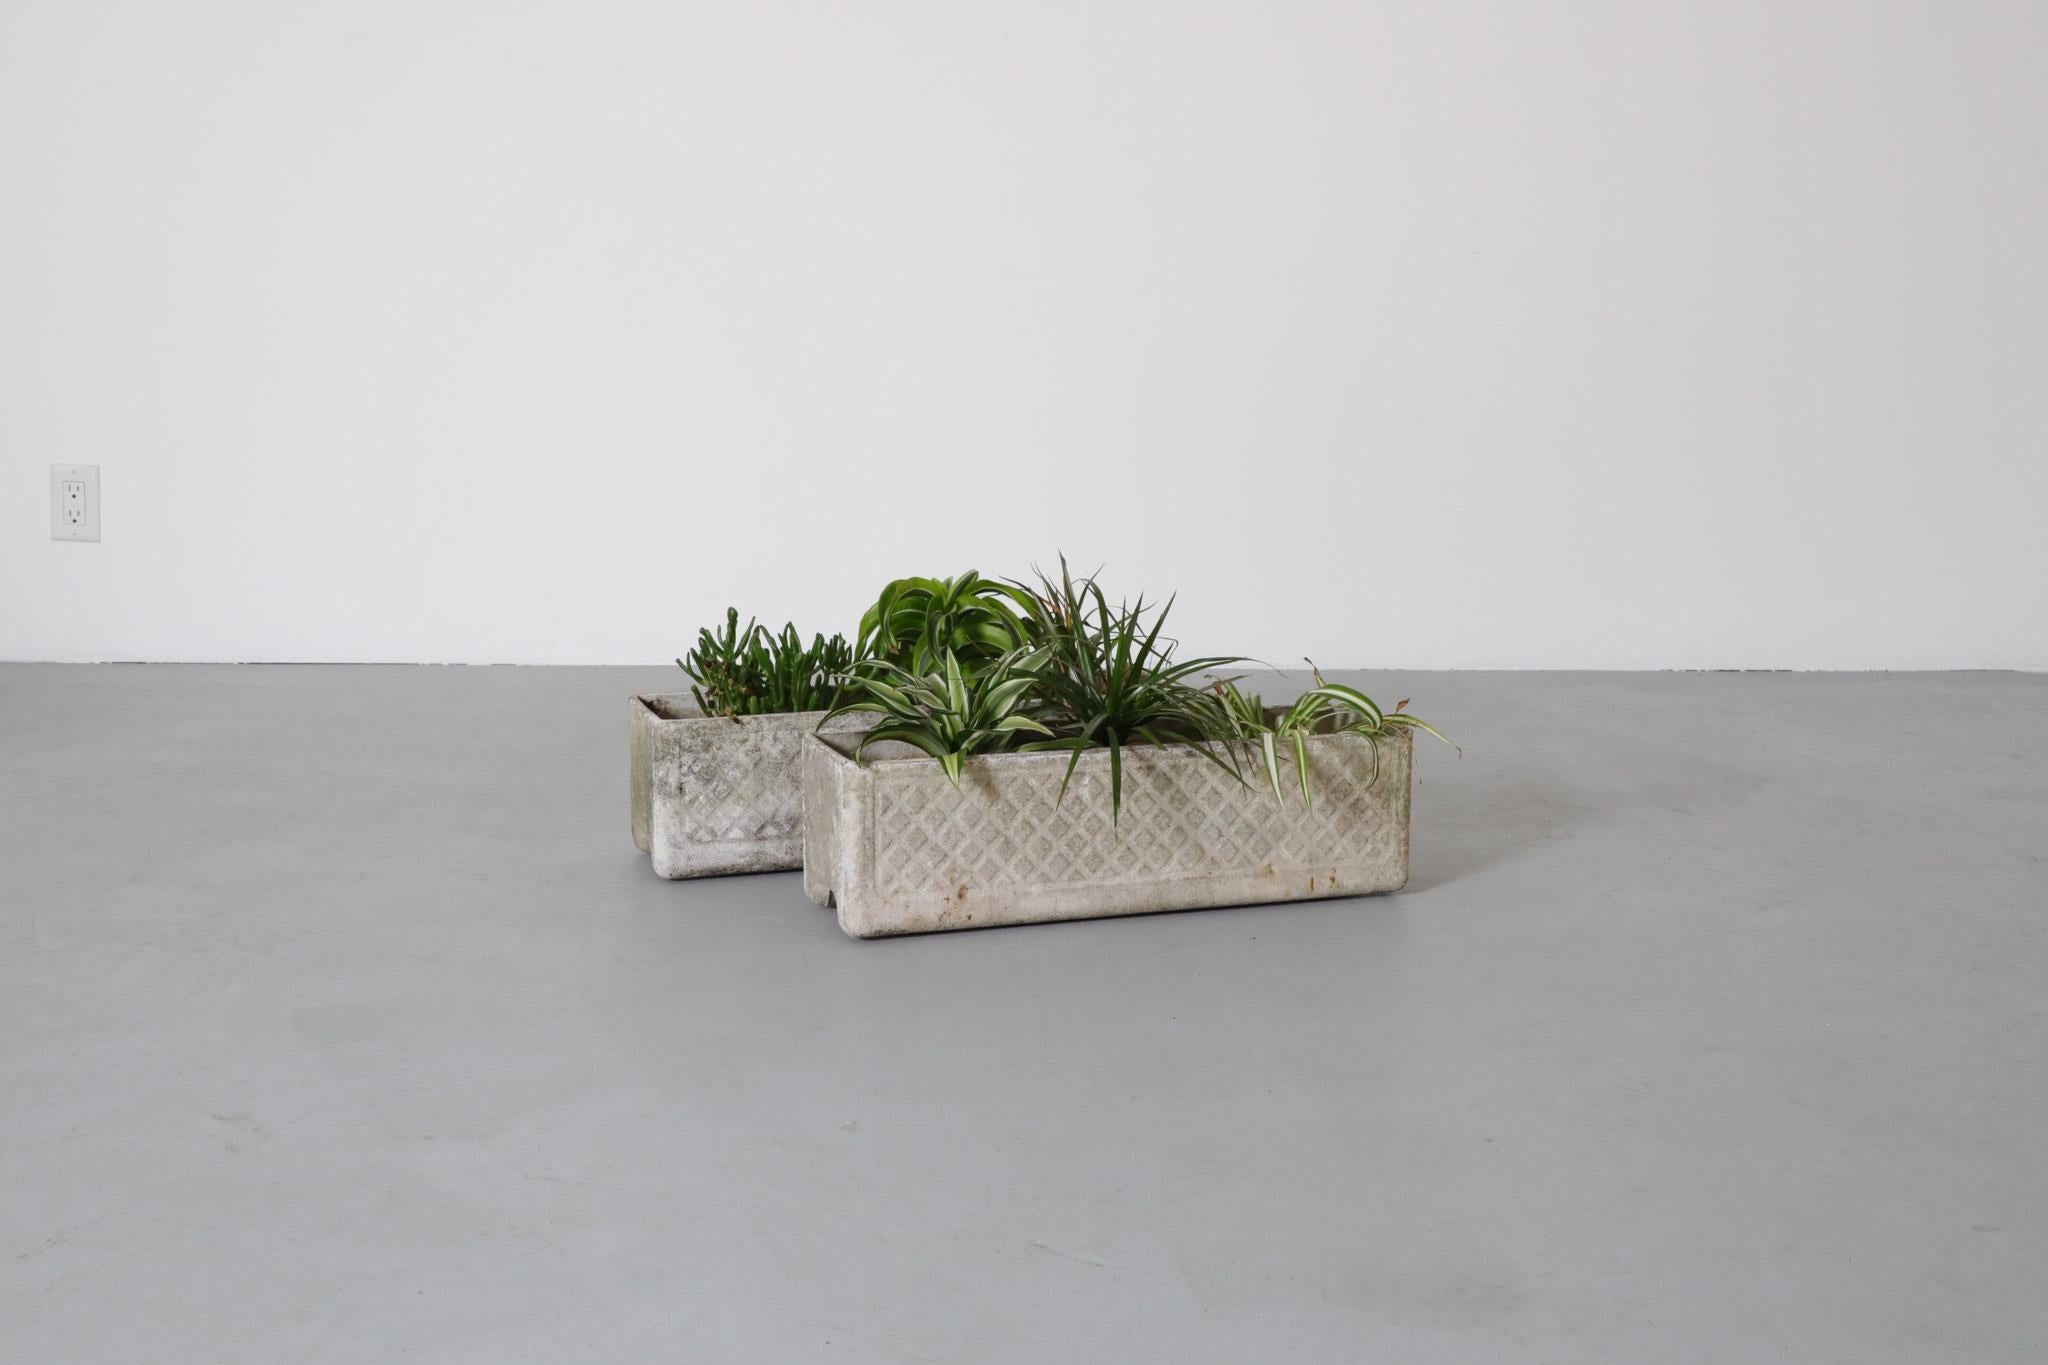 Pair of low rectangular trough planters attributed to Swiss architect Willy Guhl. Raw and minimalistic planters with a subtle imprinted carvings on the sides. For outdoor use. In very original condition with visible wear consistent with their age